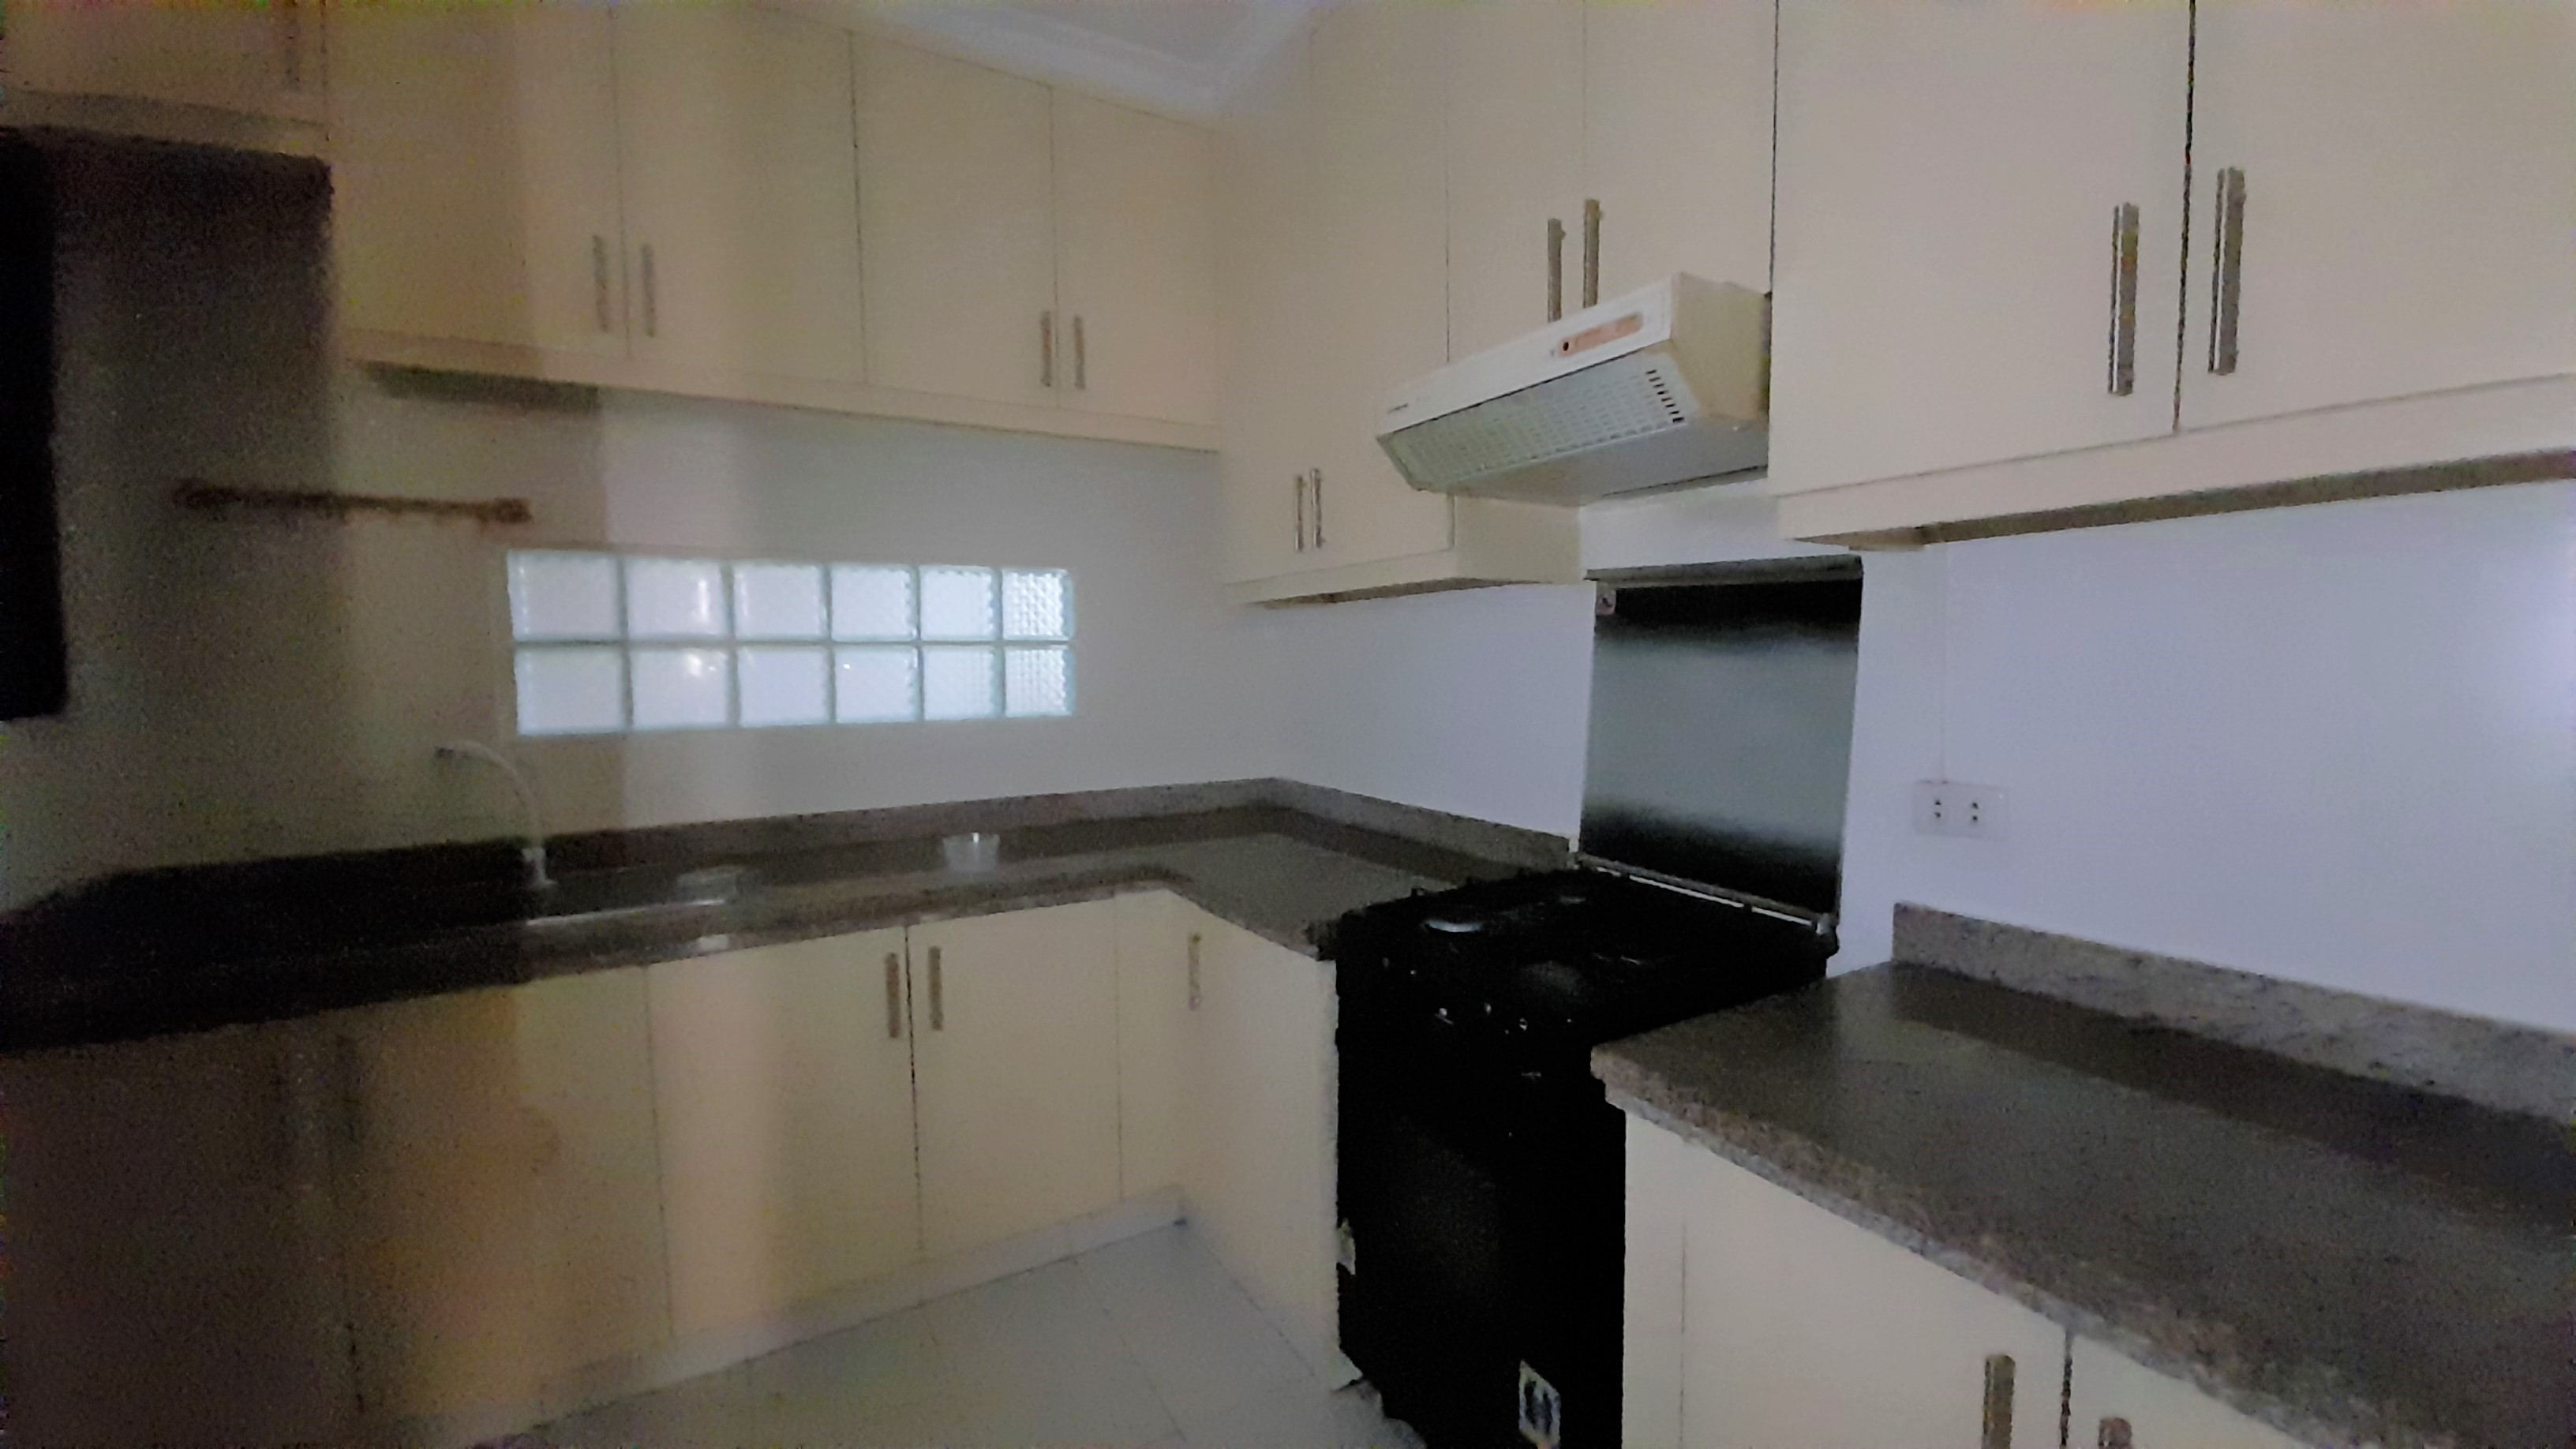 3-bedroom-semi-furnished-house-with-spacious-bedrooms-in-mabolo-cebu-city